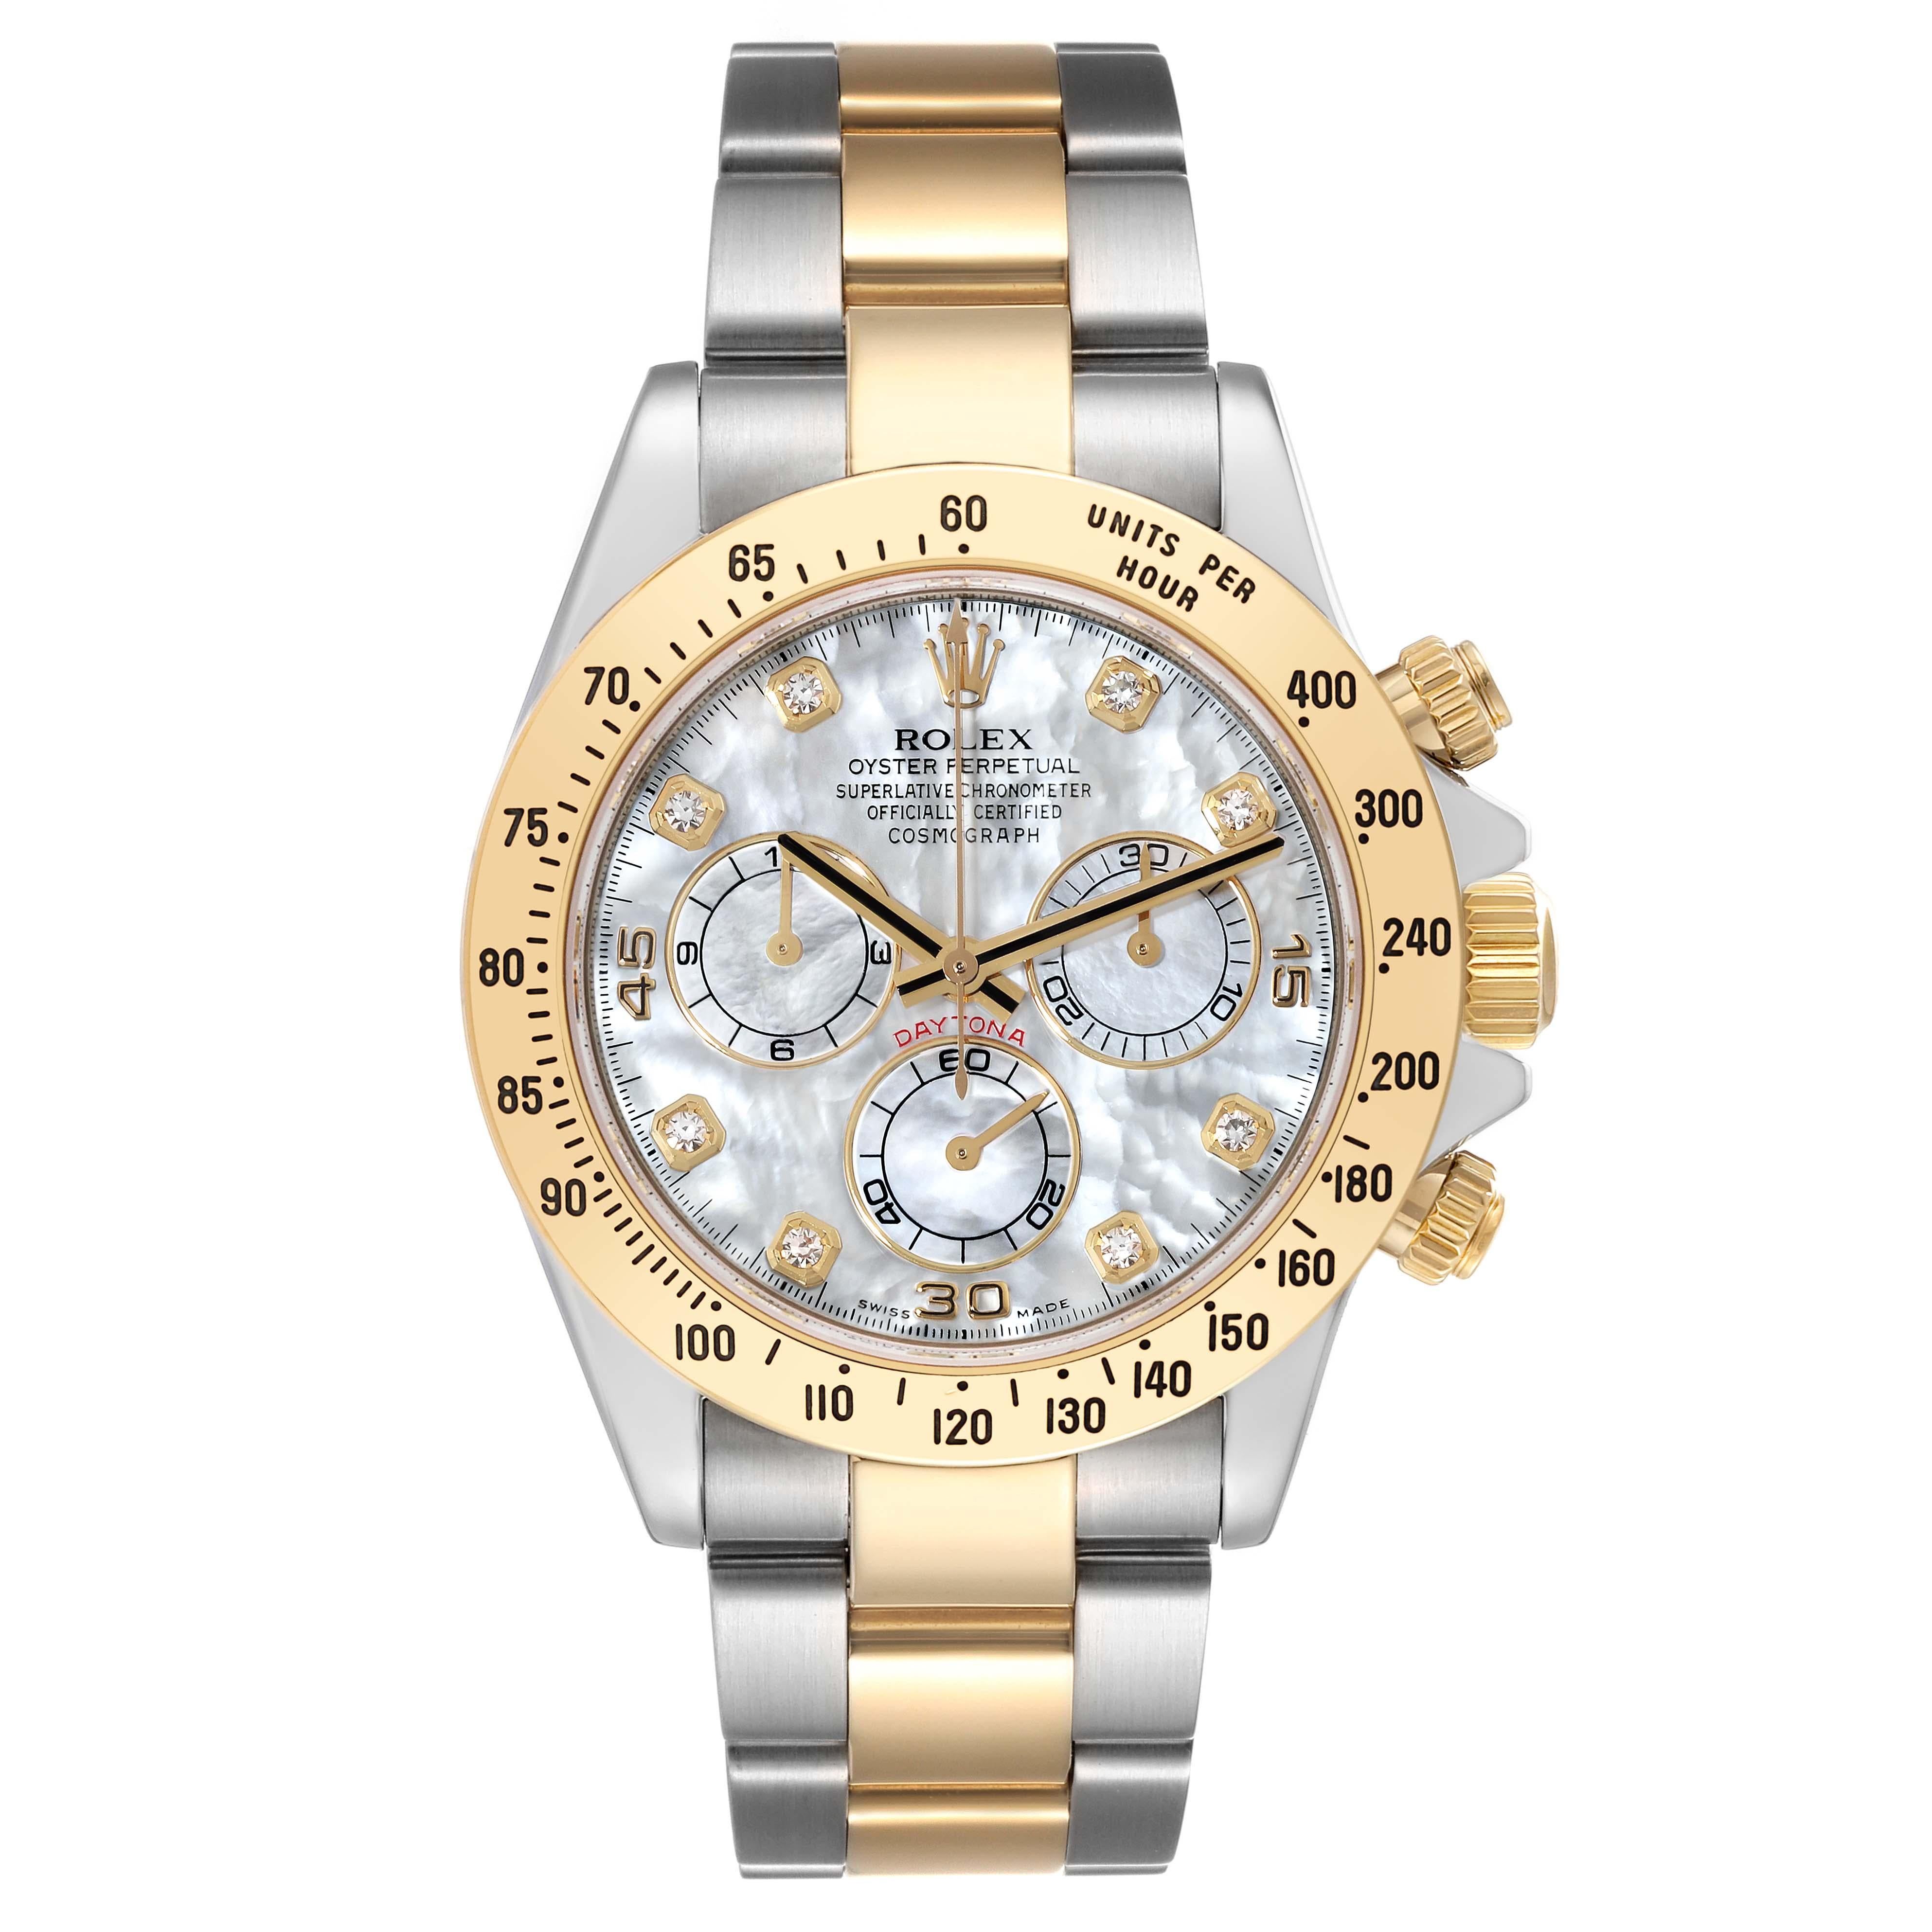 Rolex Daytona Yellow Gold Steel Mother of Pearl Diamond Mens Watch 116523 Box Card. Officially certified chronometer self-winding movement. Rhodium-plated, oeil-de-perdrix decoration, straight line lever escapement, monometallic balance adjusted to